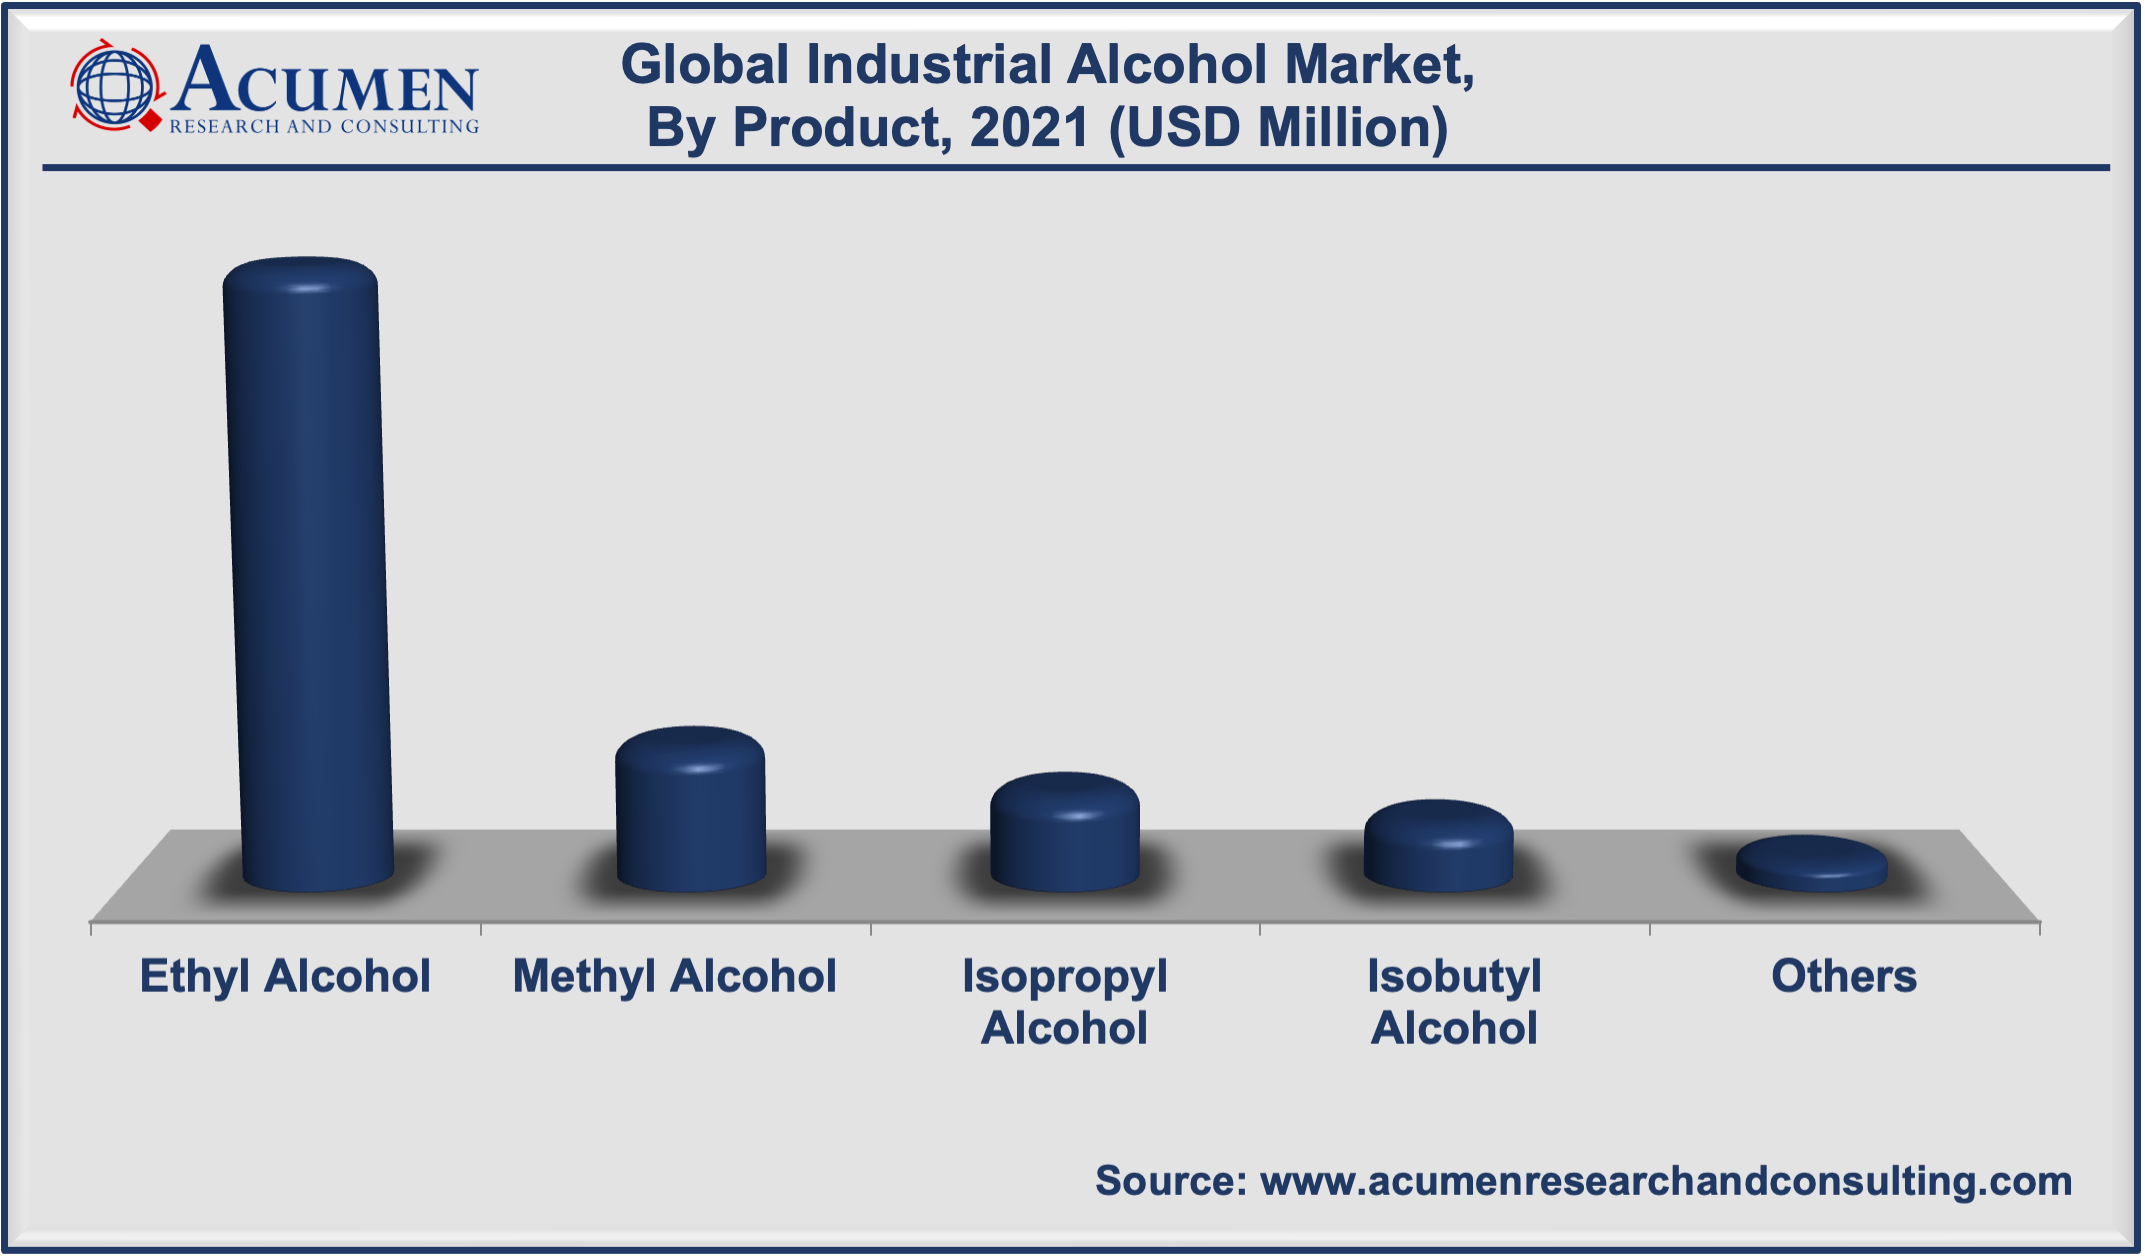 Industrial Alcohol Market Share accounted for USD 124 Billion in 2021 and is estimated to reach the market value of USD 301 Billion by 2030.